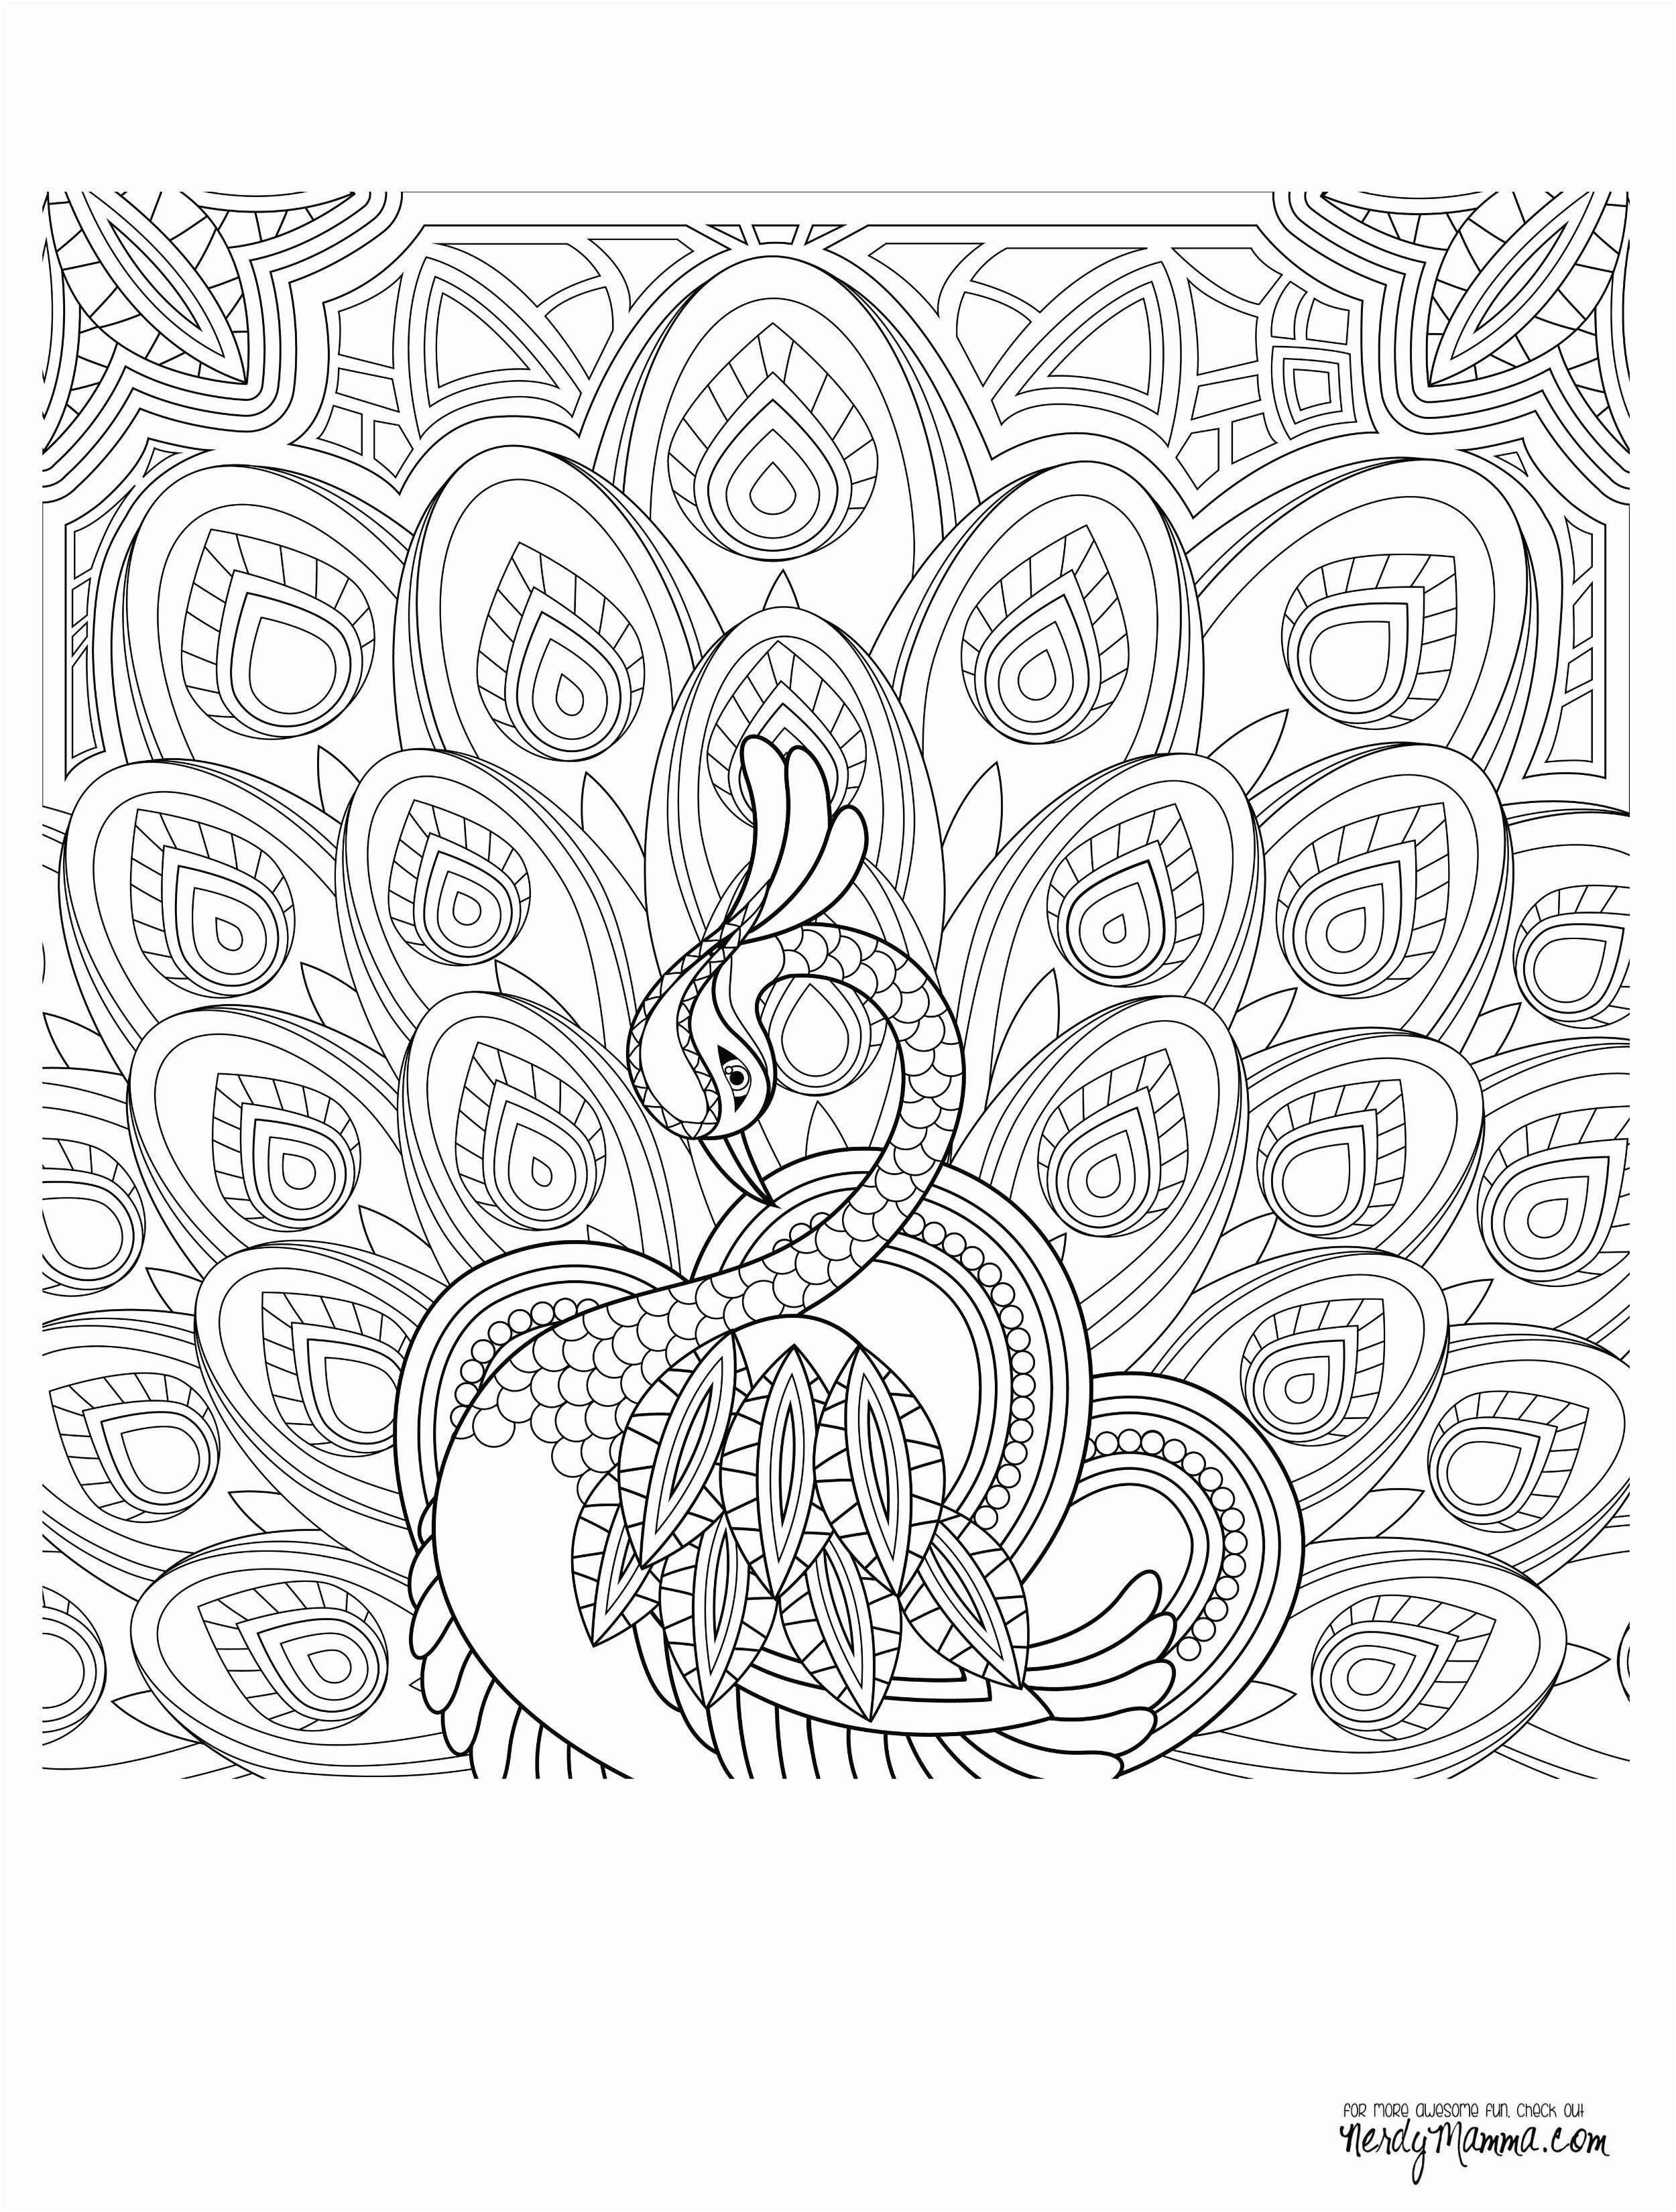 coloring pages to color awesome fresh s s media cache ak0 pinimg originals 0d b4 2c free inspirational coloring pages hearts and roses